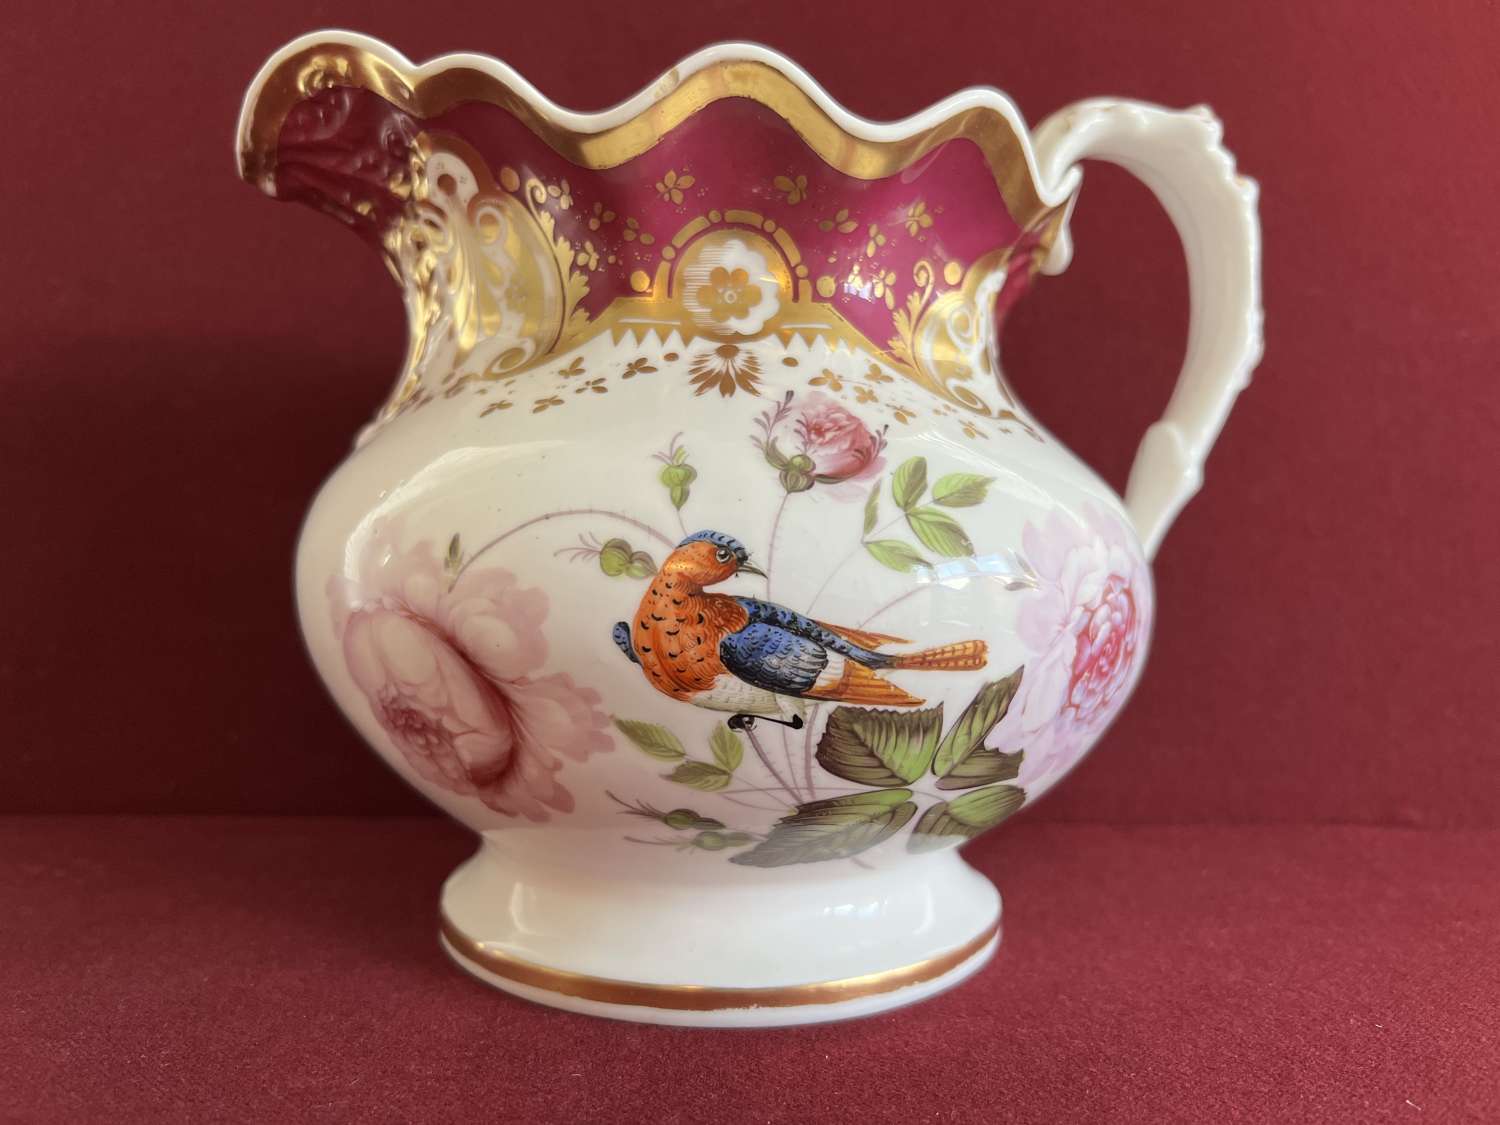 A finely decorated porcelain jug by Samuel Alcock c.1830